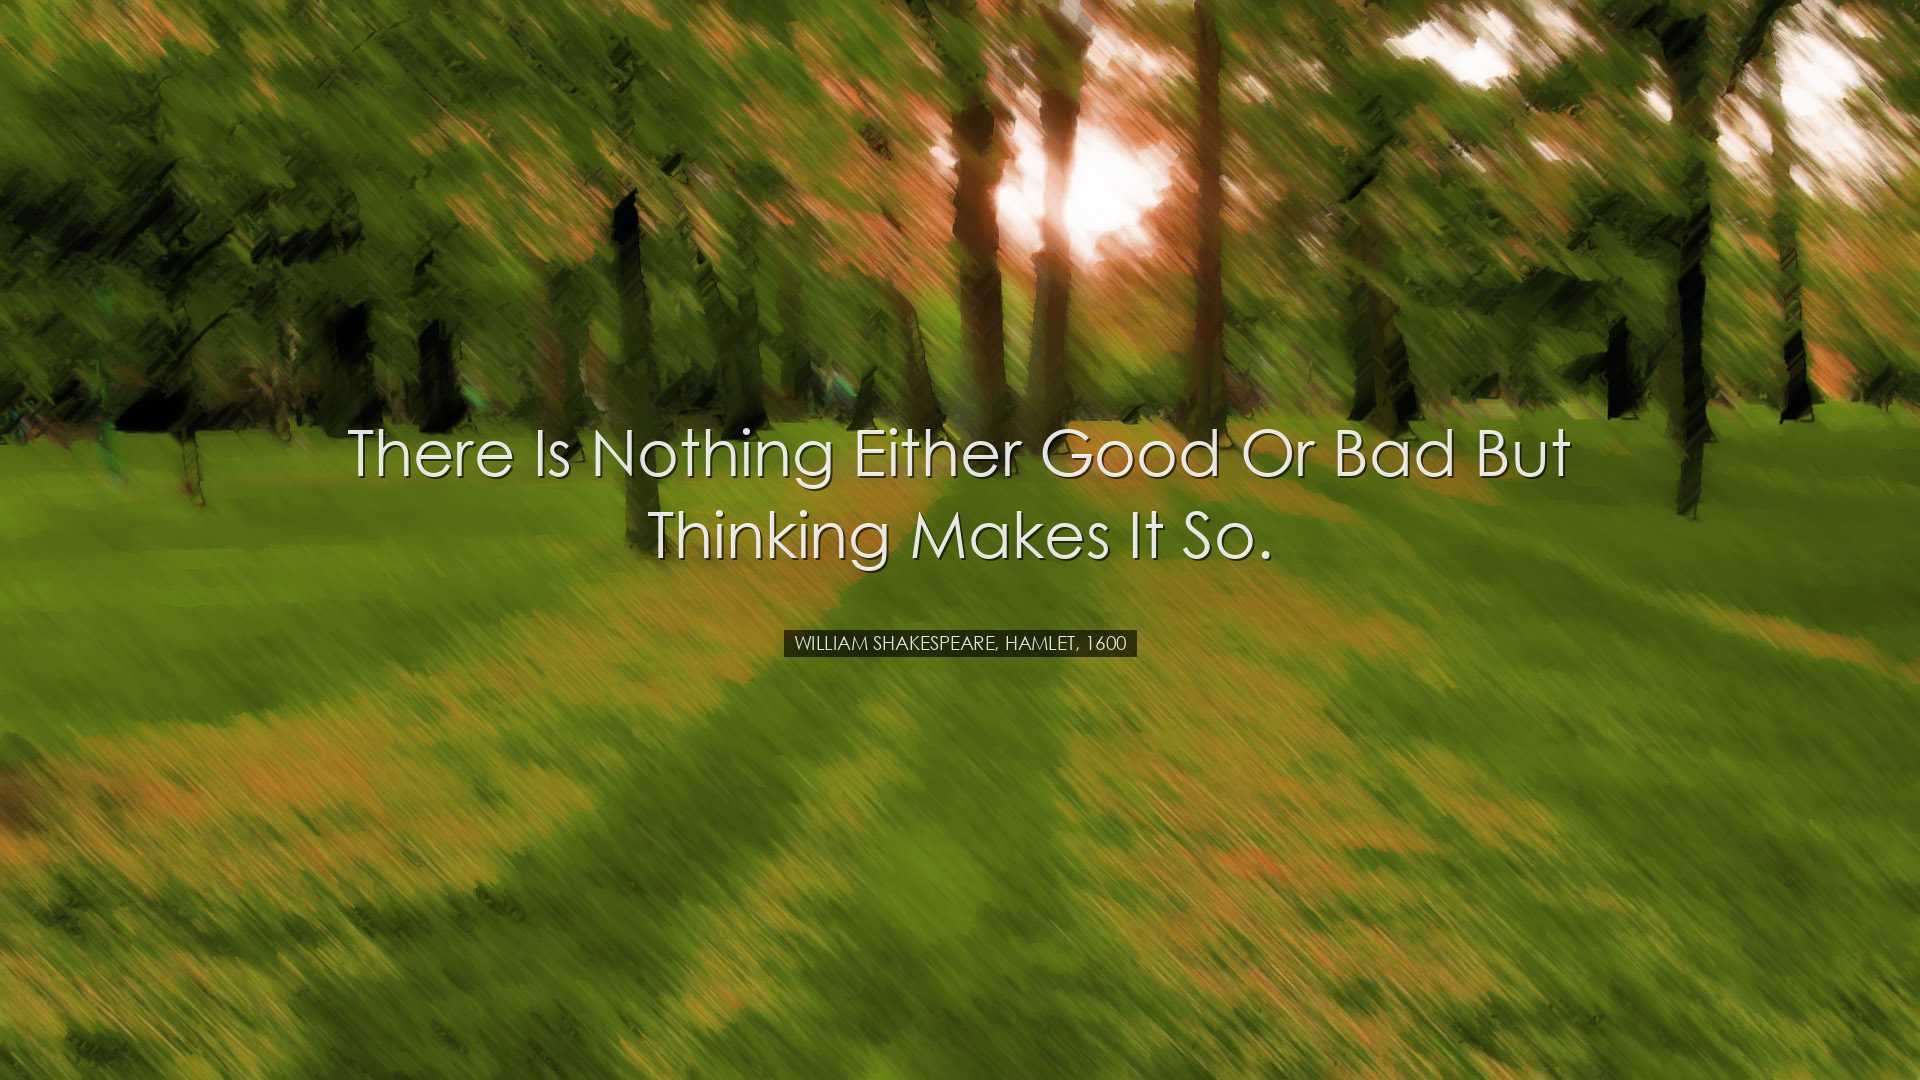 There is nothing either good or bad but thinking makes it so. - Wi